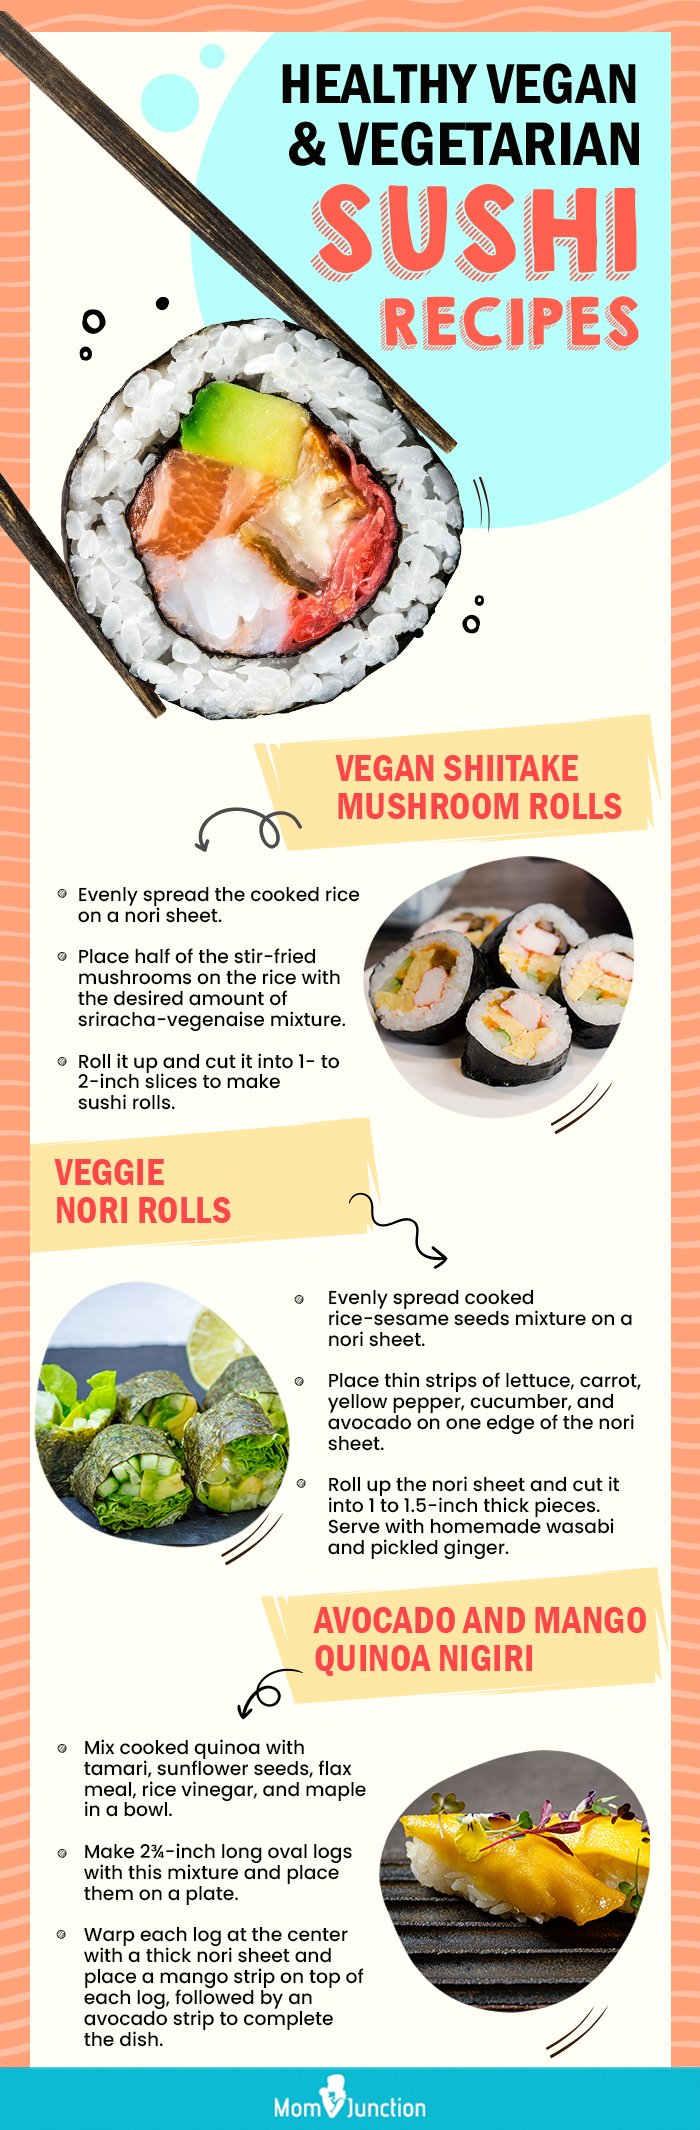 healthy vegan and vegetarian sushi recipes [infographic]